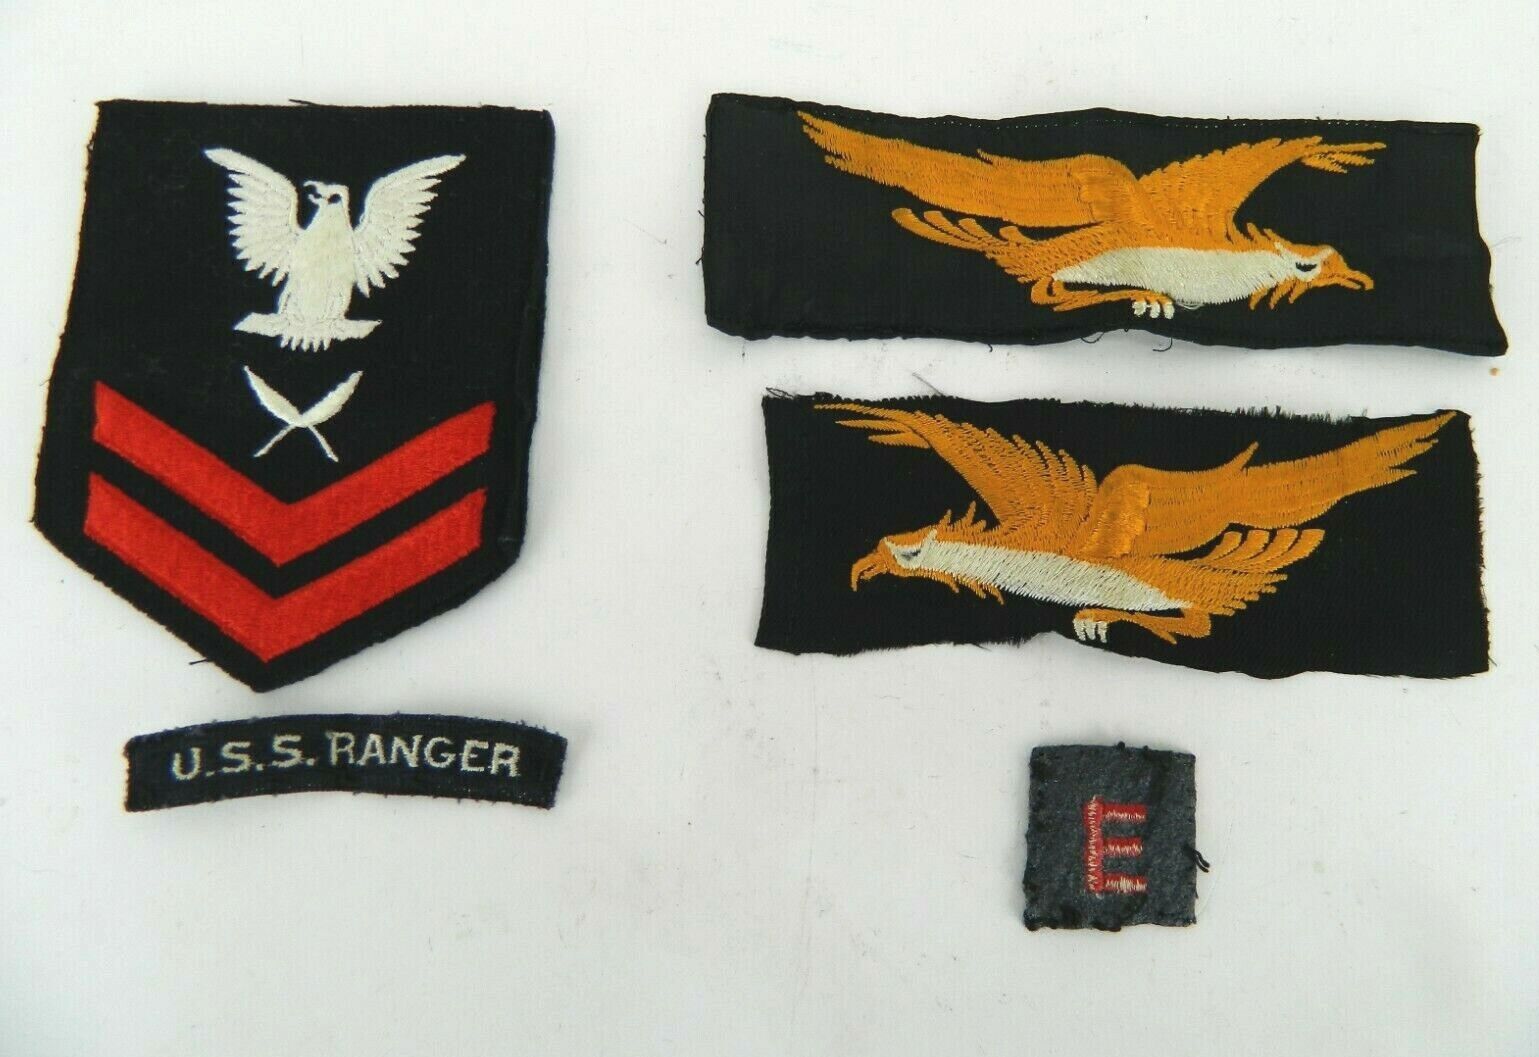 RARE Set of 5 VINTAGE UNITED STATES NAVY WWII Patches U.S.S. Ranger Ship